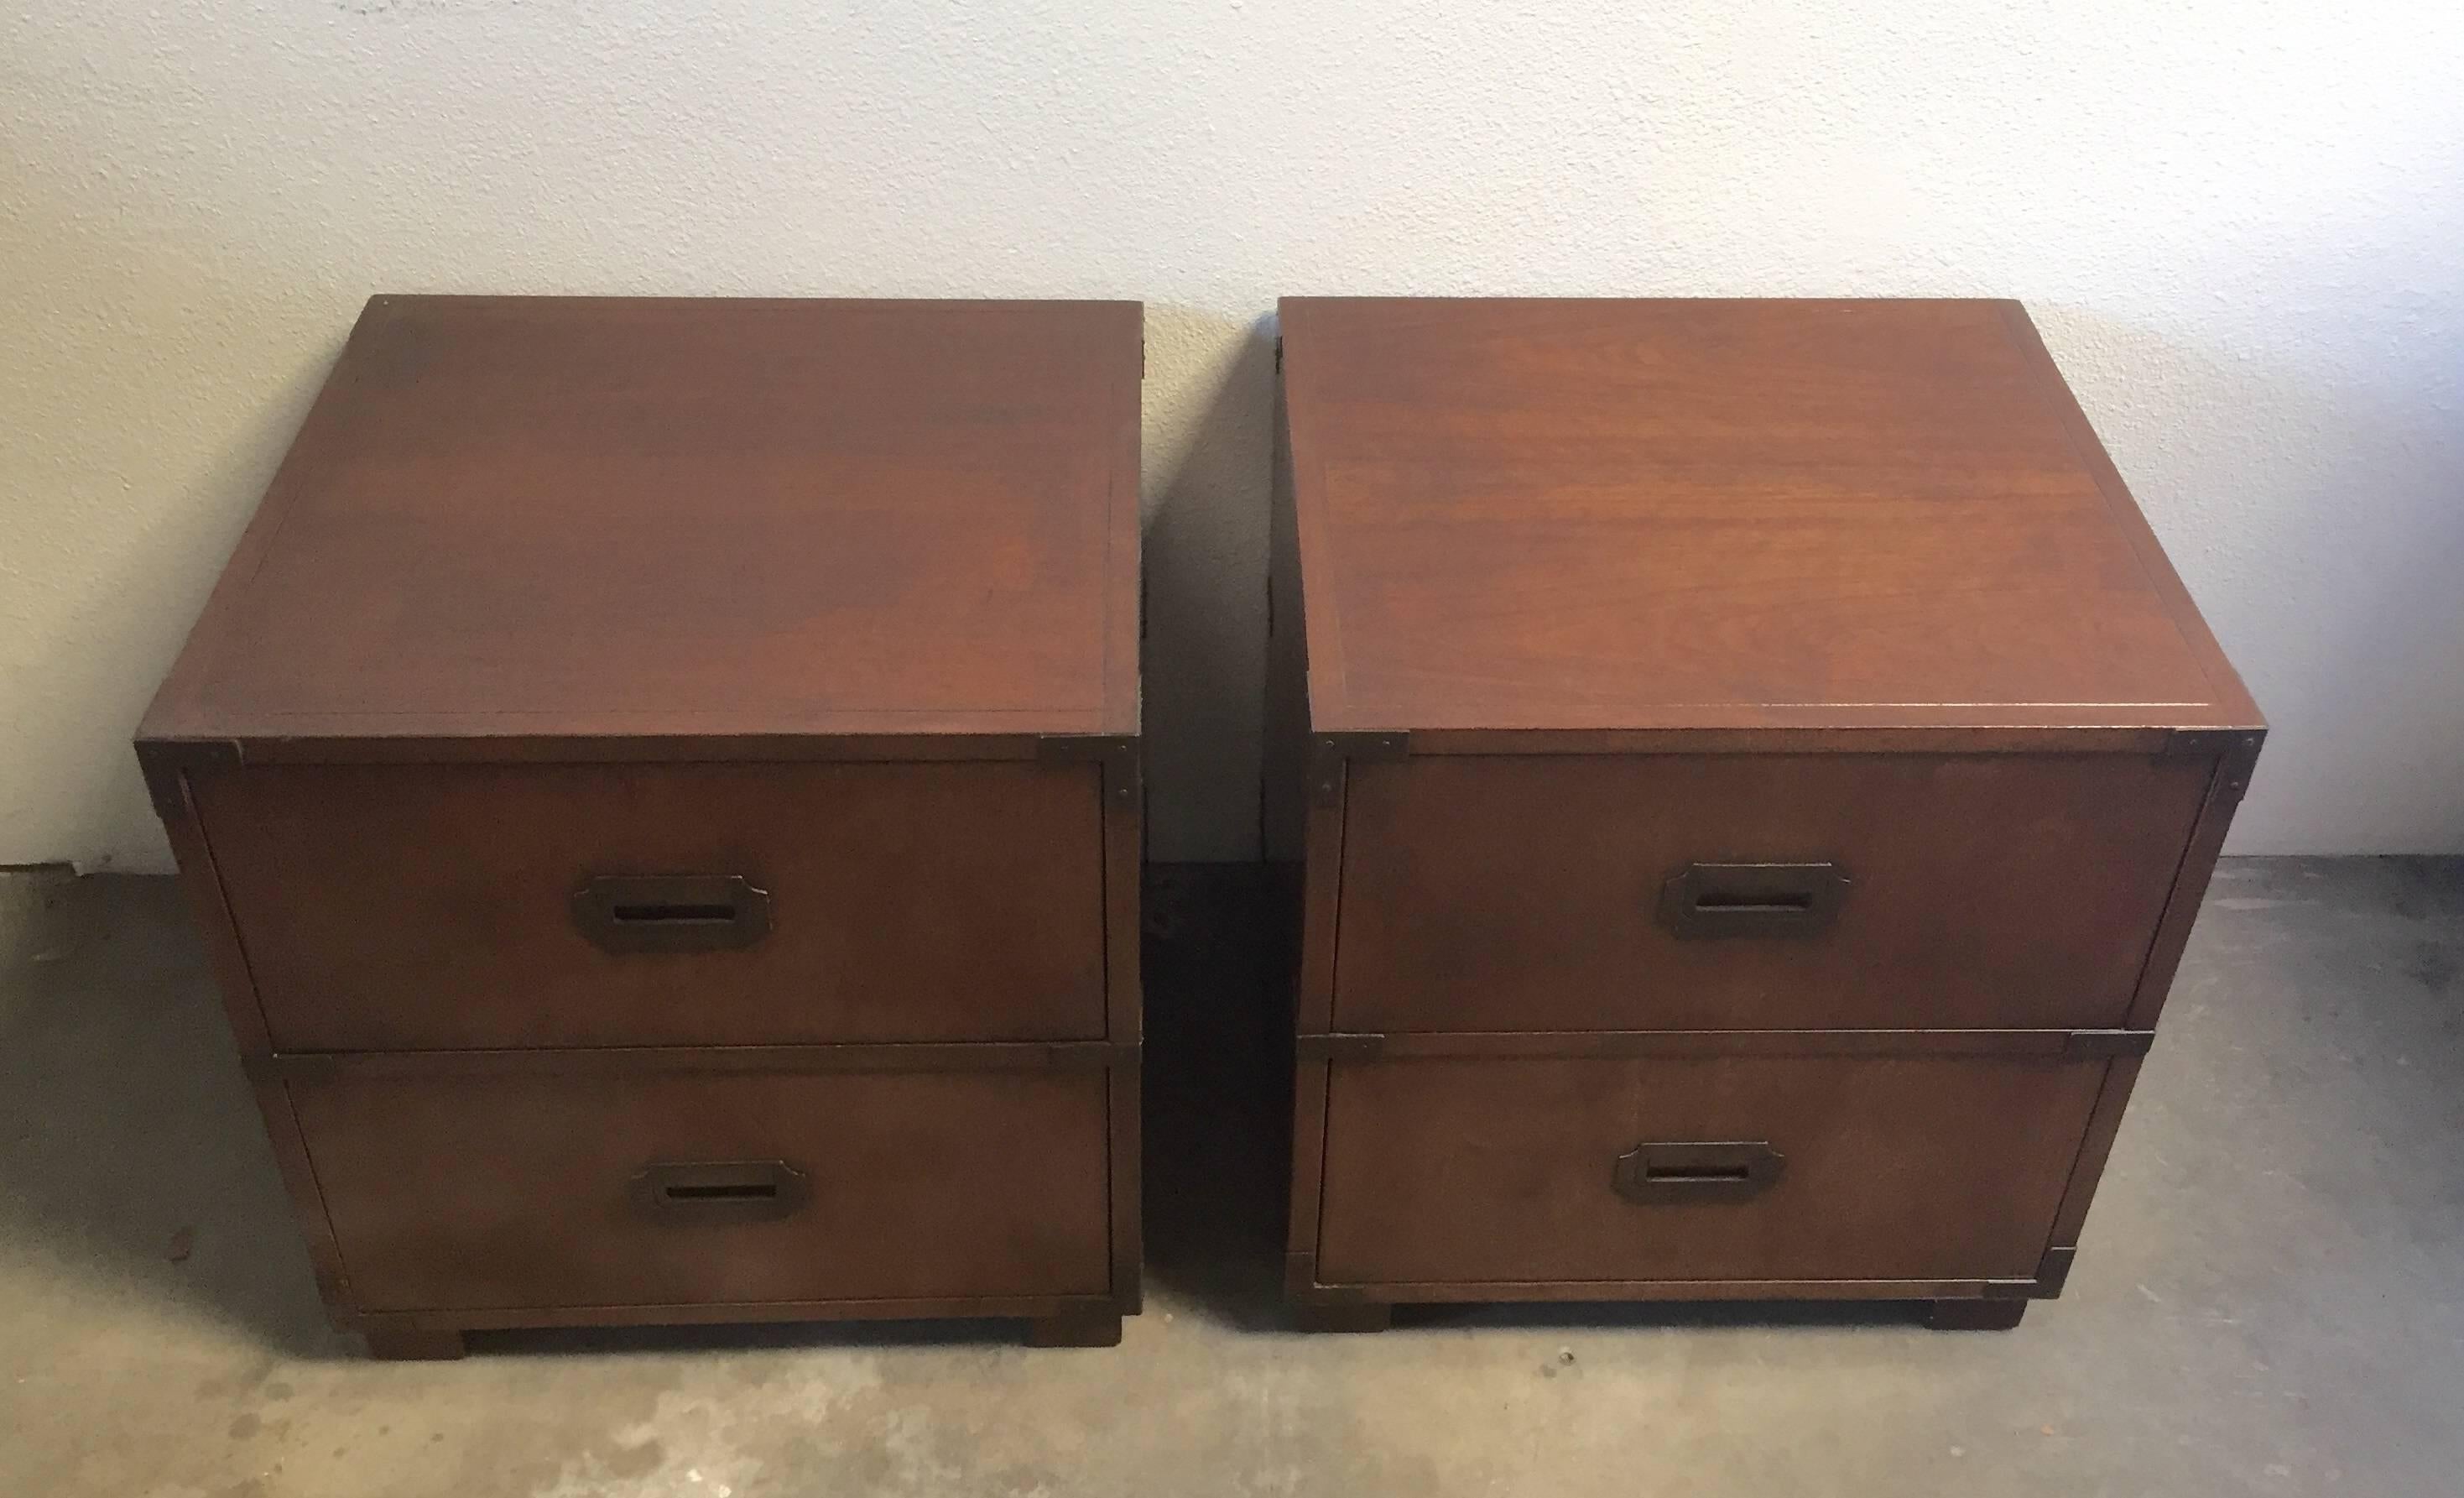 Pair of Baker Campaign style side tables. Each table has two drawers: Top one with a fold down front and pull-out drawer below. Restrained with original aged brass accents. Maker's mark inside bottom drawer of both tables.